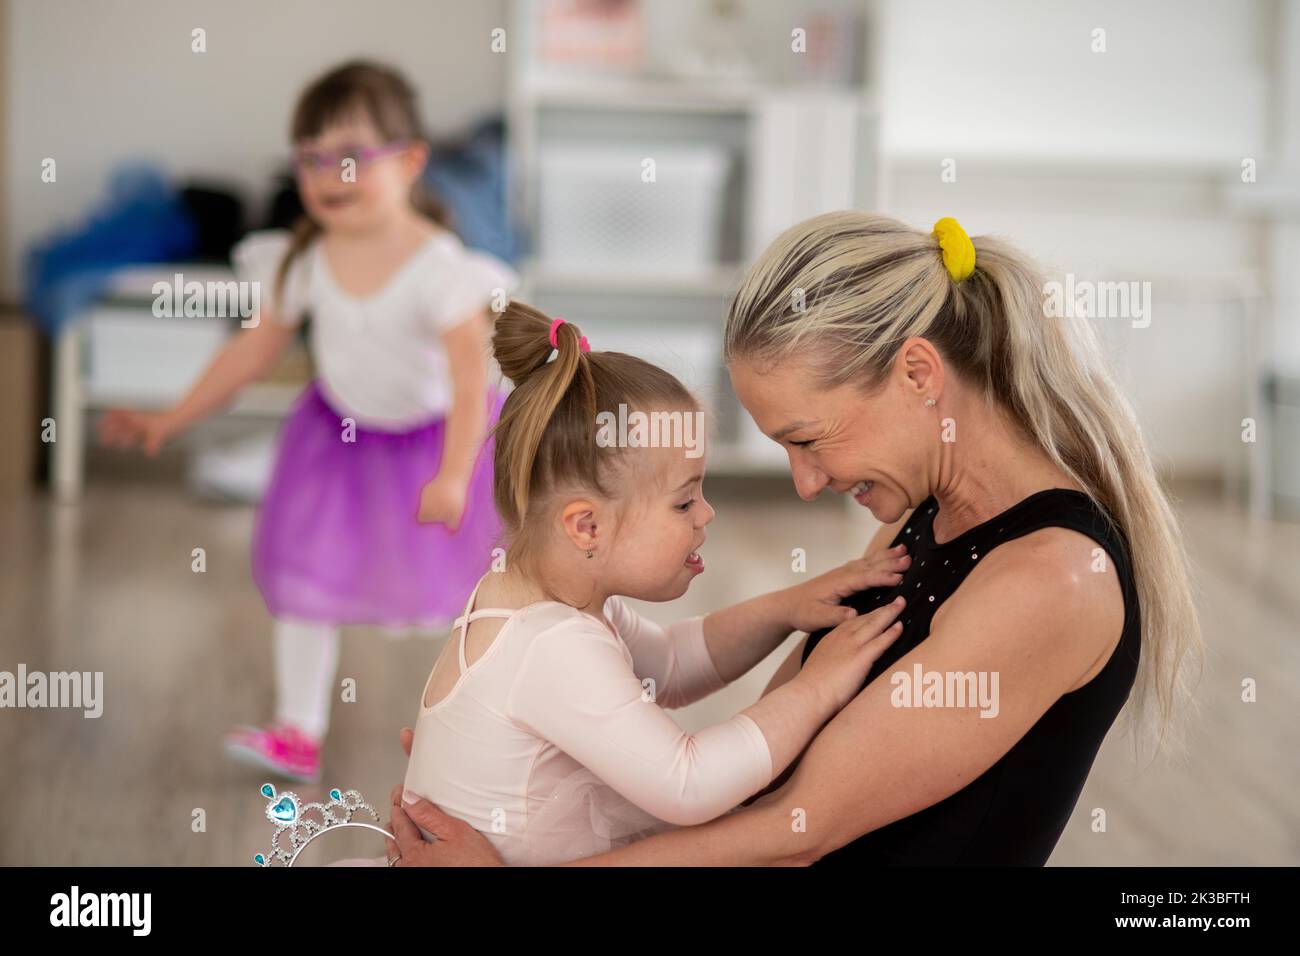 Little girl with down syndrome cuddling with her mother during ballet class. Concept of integration disabled children and parenthood. Stock Photo